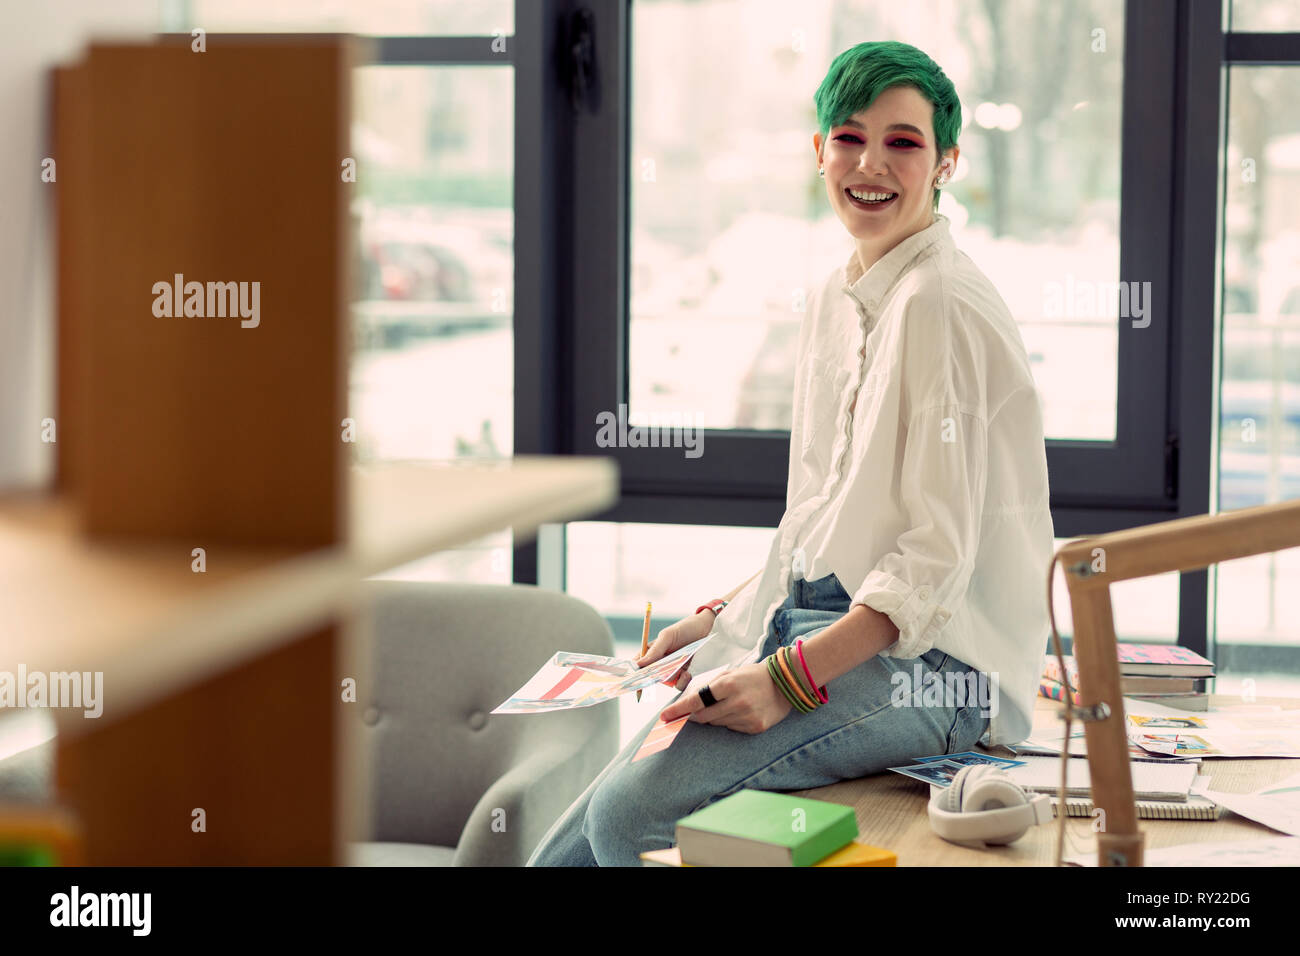 Cheerful positive nice woman being at work Stock Photo